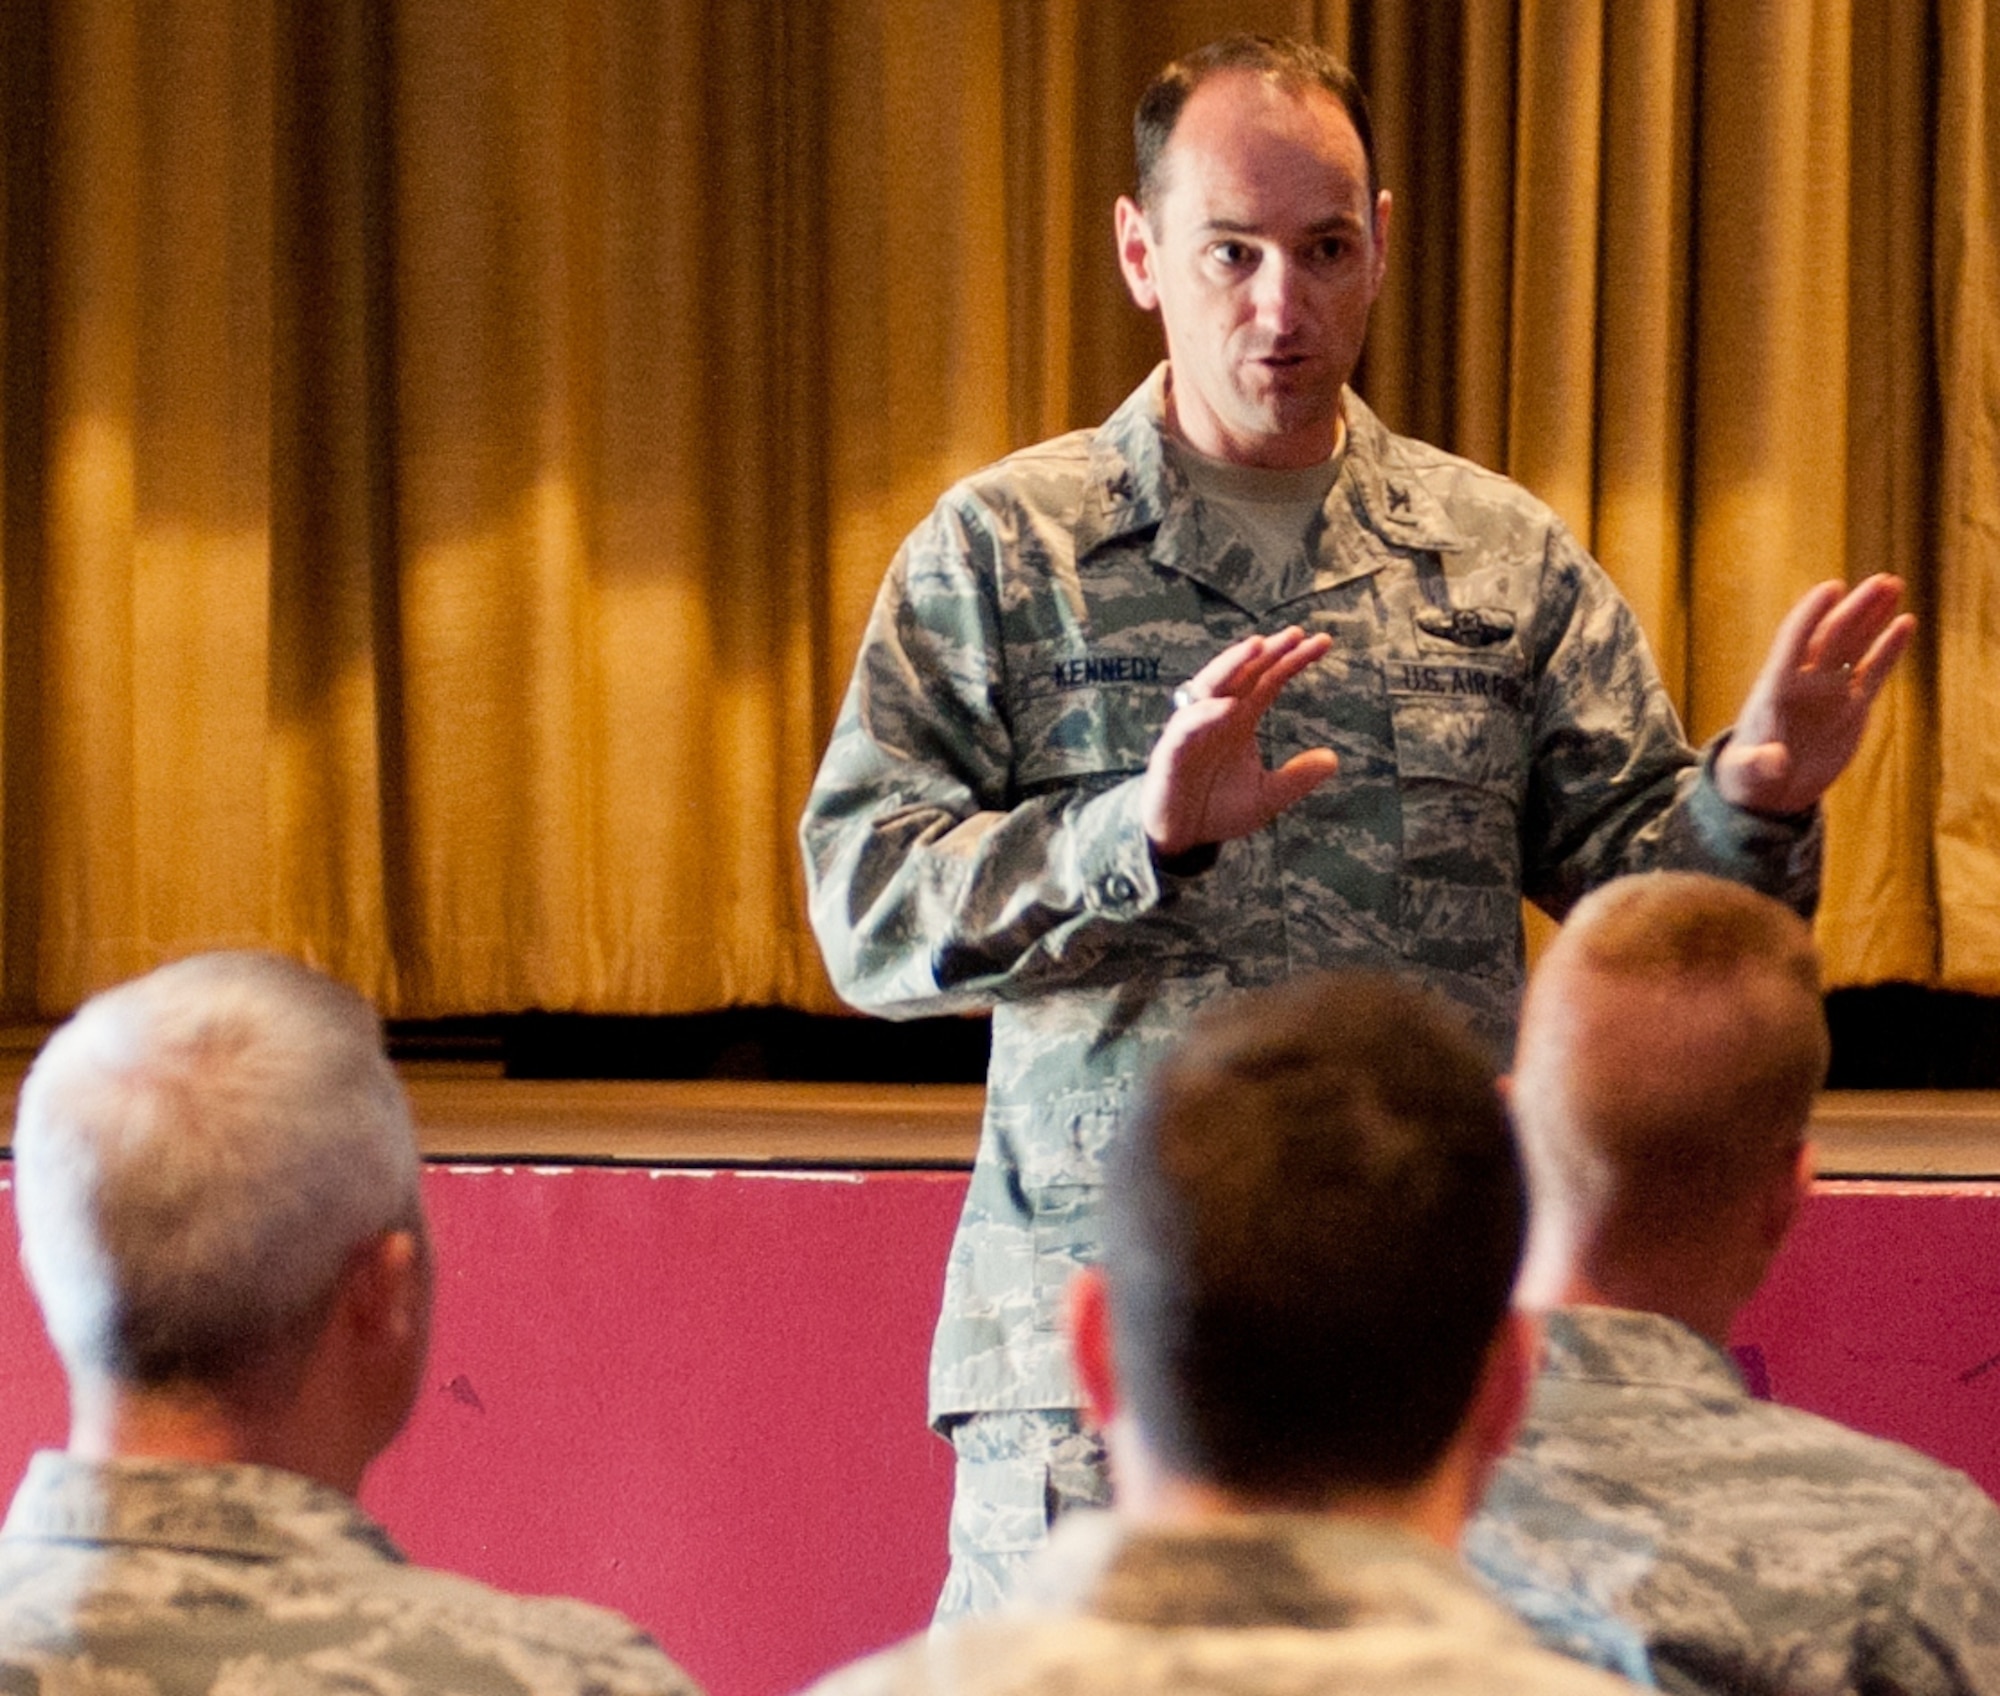 Col. Kevin Kennedy, 28th Bomb Wing commander, addressed his Airmen during a recent commander's call in the Base Theater at Ellsworth Air Force Base, S.D., May 6, 2013. Kennedy emphasized that good order and discipline is a command responsibility, however each member of the wing has a duty to foster a healthy climate and professional environment. (U.S. Air Force photo by Senior Airman Kate Maurer/Released)